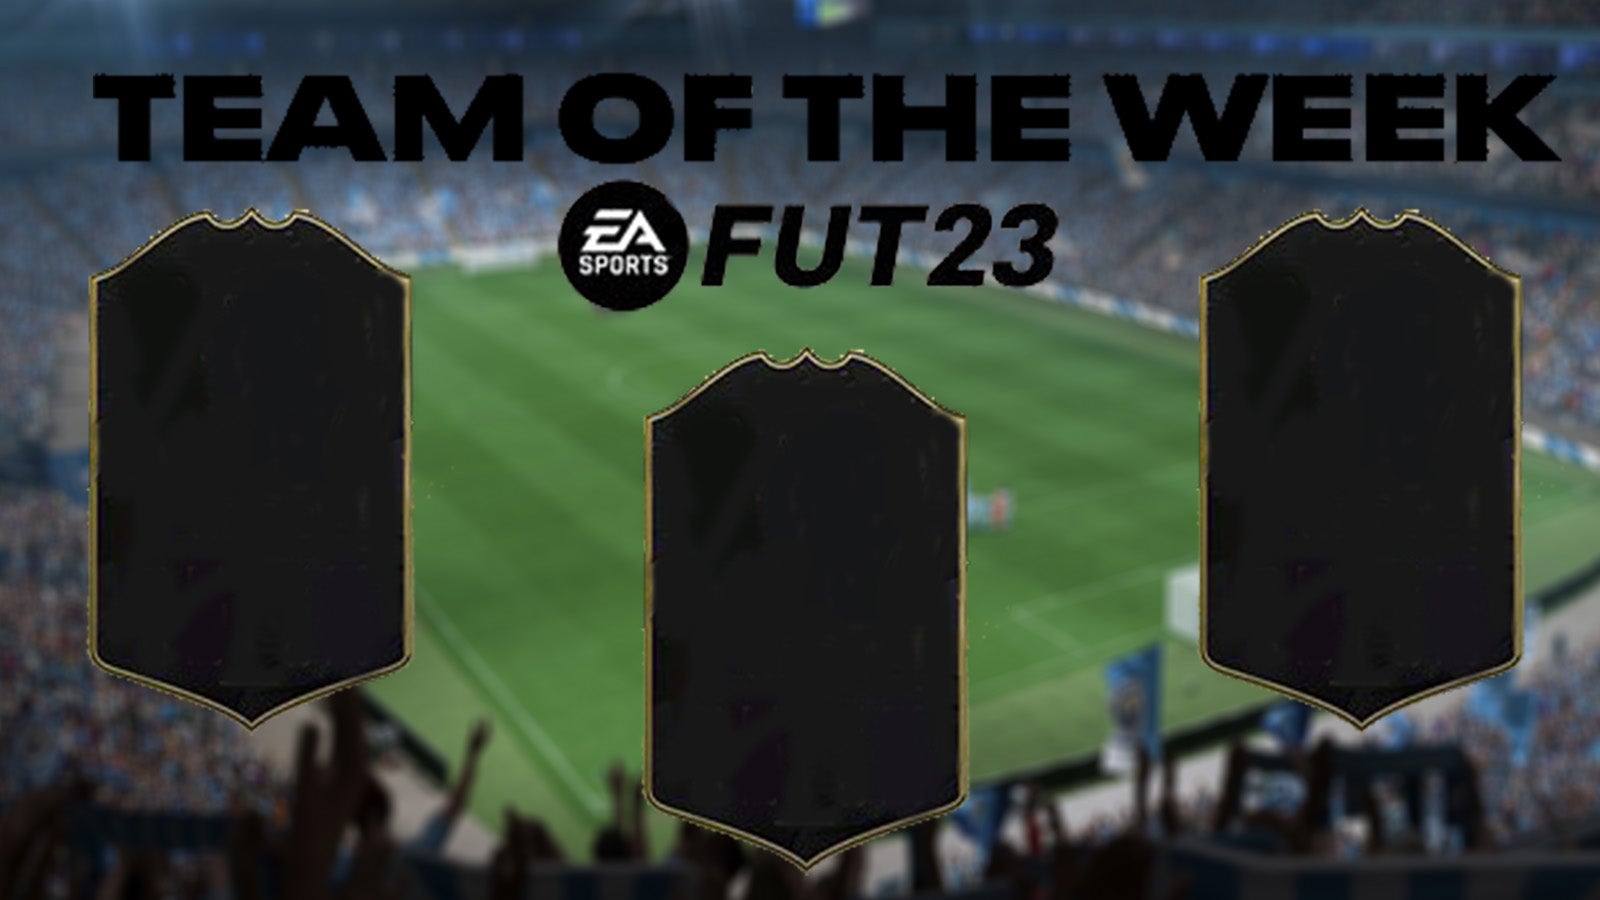 Image for FIFA 23 TOTW 9, including all past FUT Team of the Week players